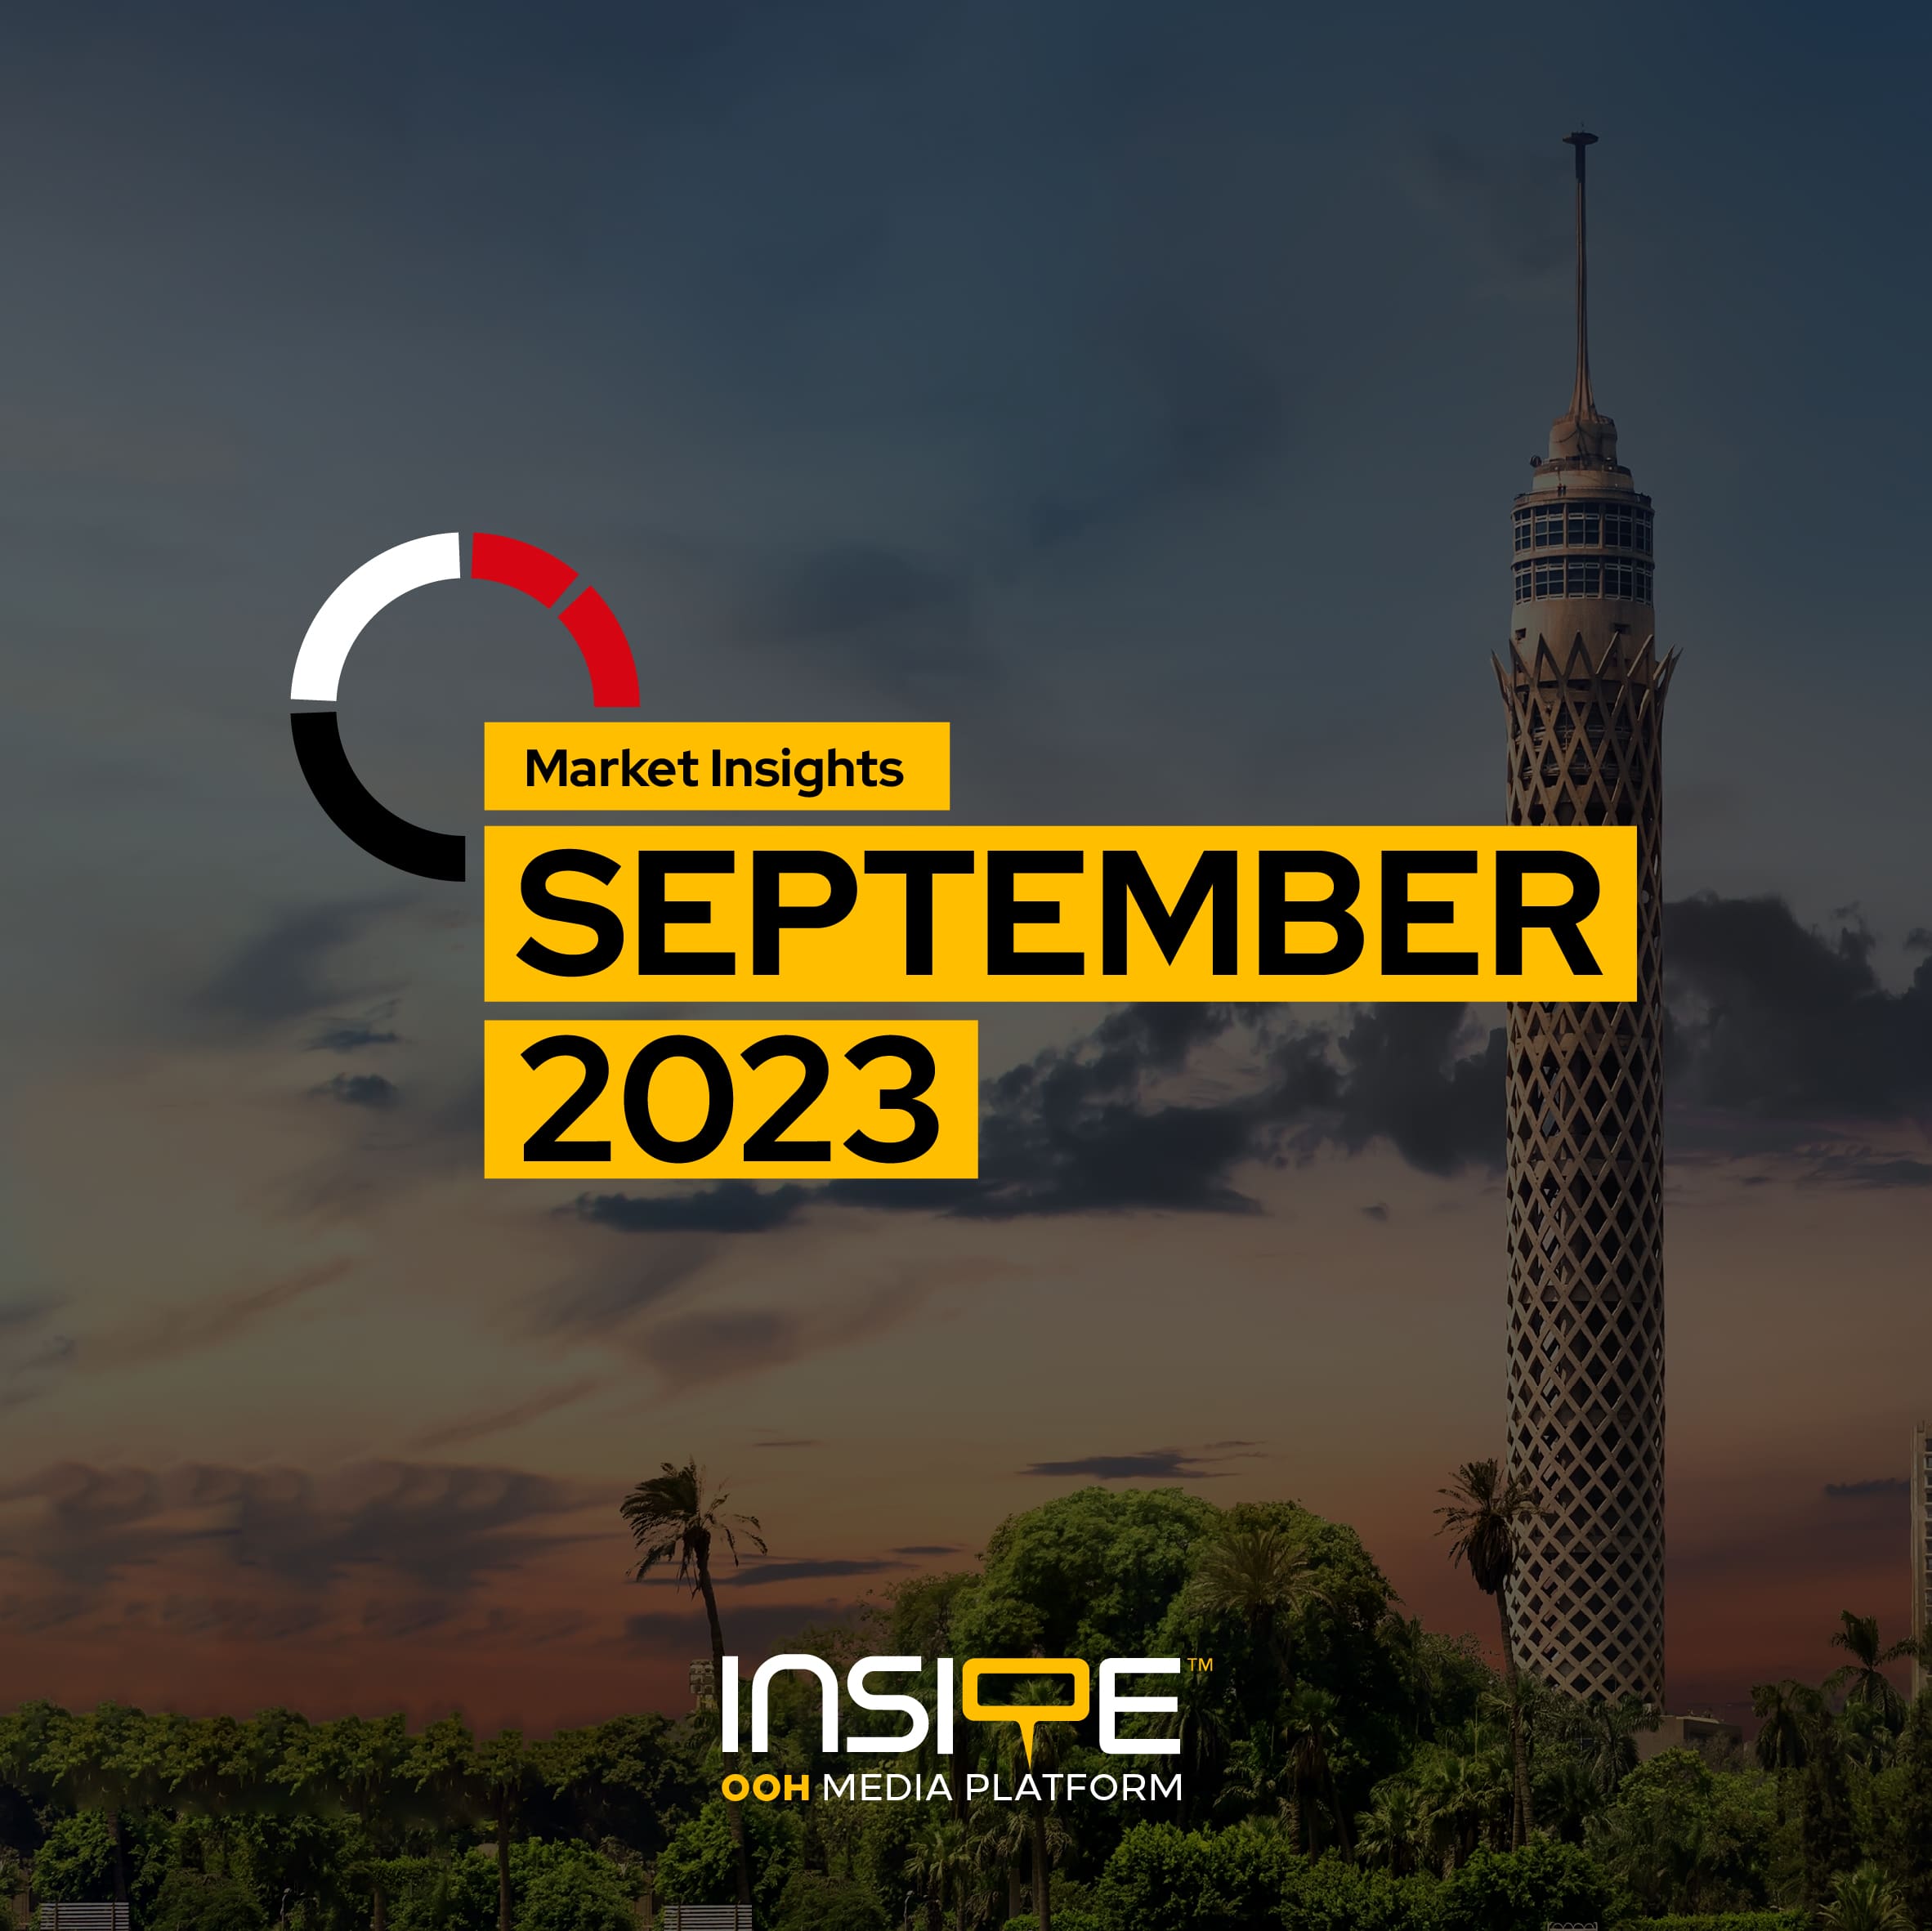 OOH in Greater Cairo to Face a Significant Year-Over-Year Increase, September 2023 Leads the Way